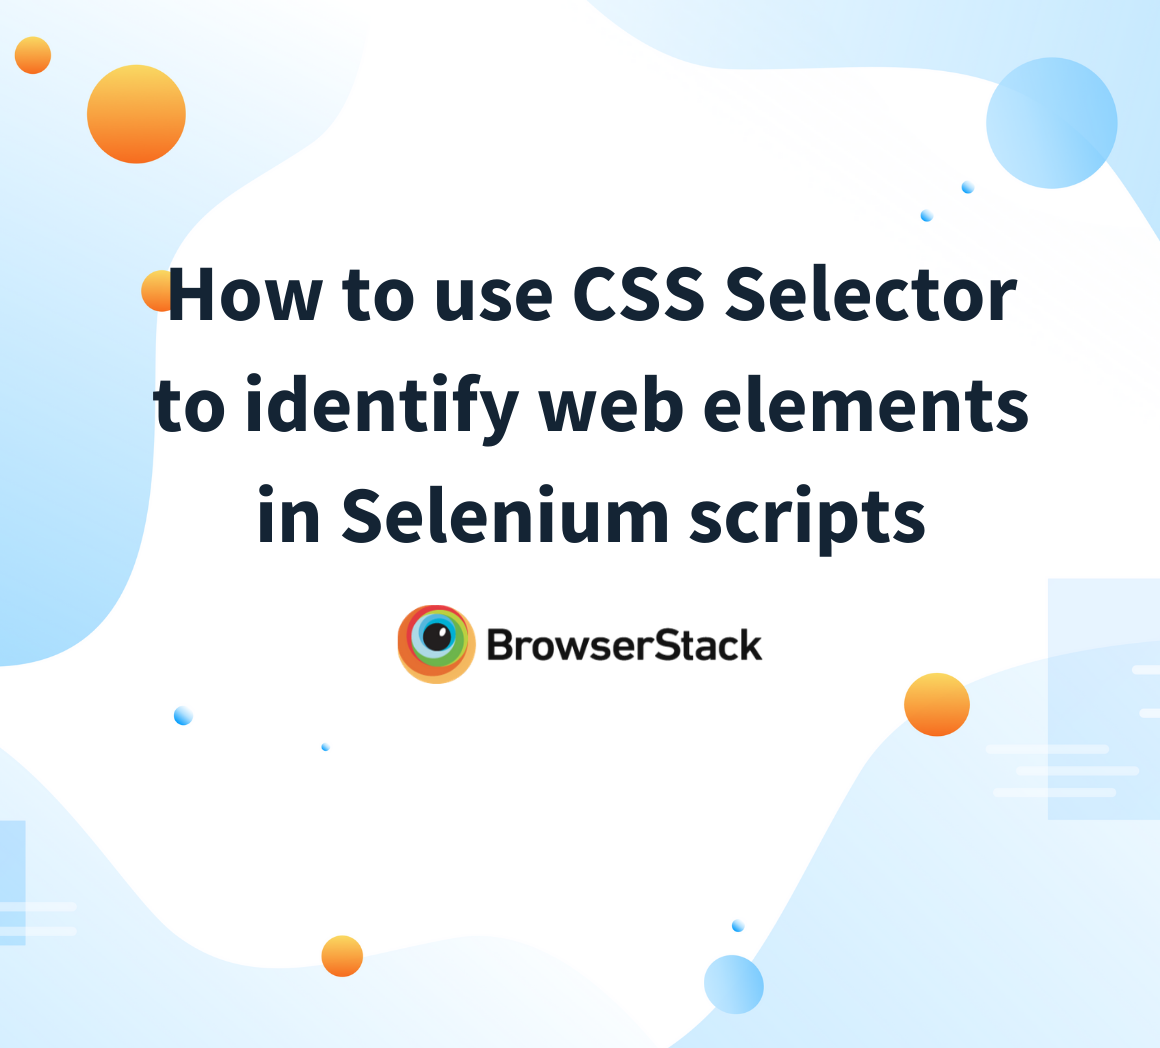 Use CSS selector to identify web elements in Selenium scripts